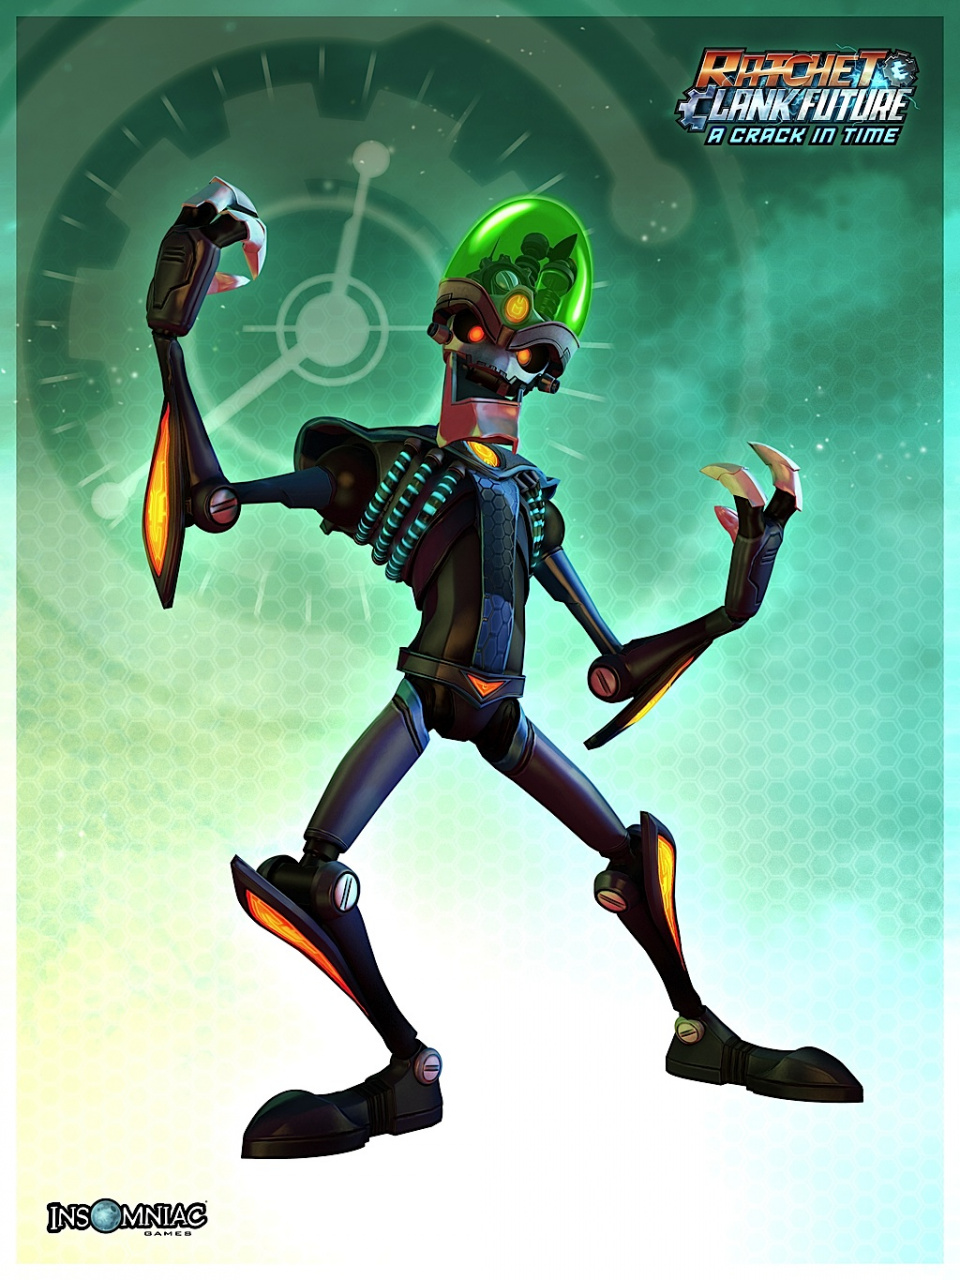 Meet the PlayStation Move Heroes: Ratchet and Clank.